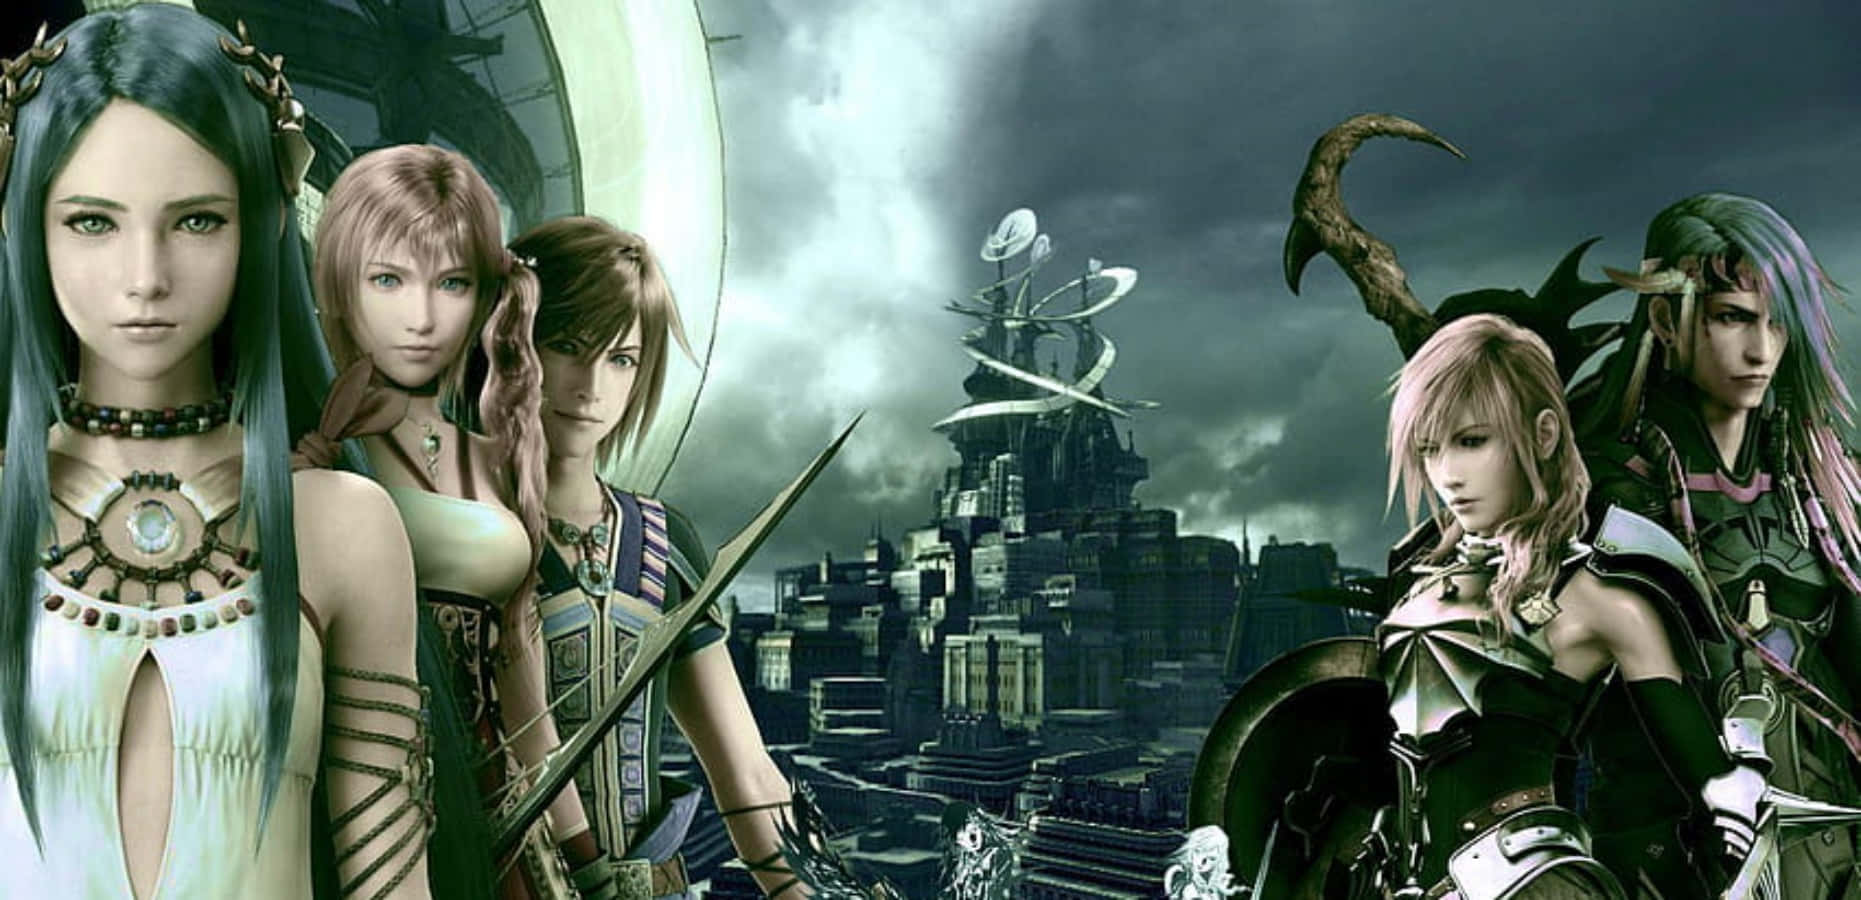 Enthralling Final Fantasy characters assembled for an epic adventure Wallpaper